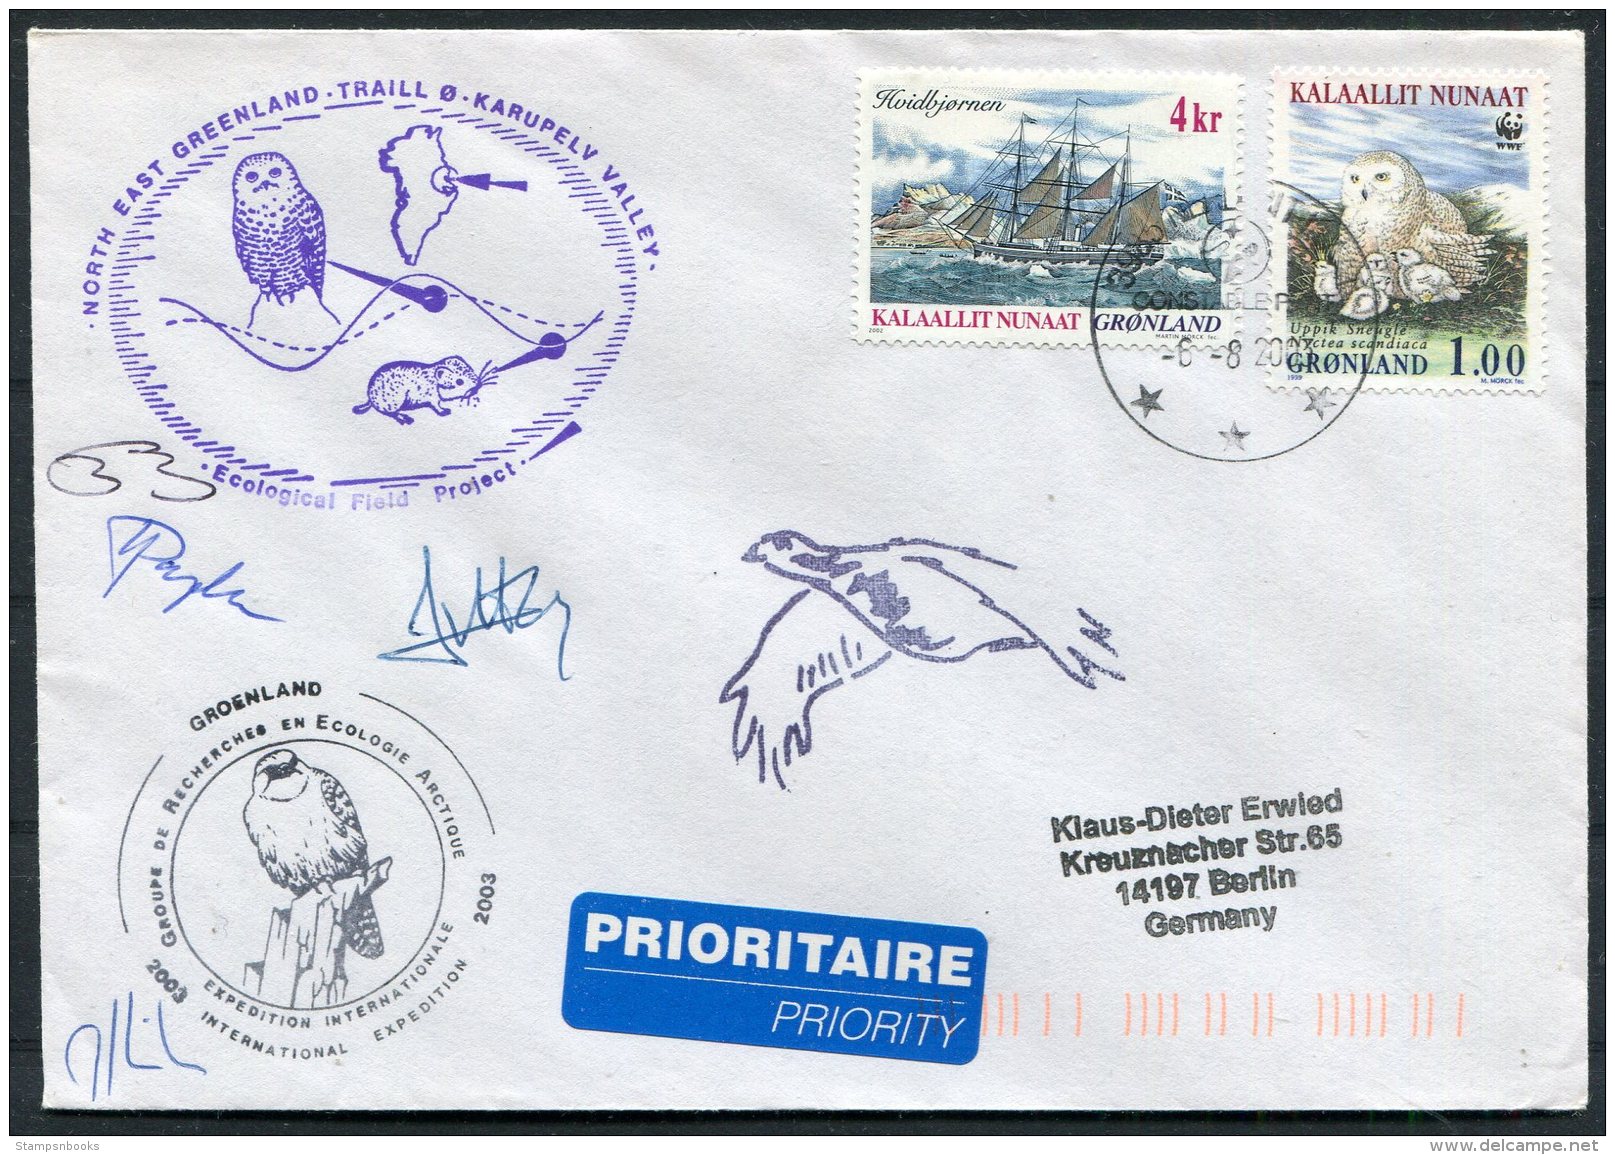 2003 North East Greenland, Karupelv Valley, Polar Owl Birds Research Arctic Expedition Signed Cover - Covers & Documents